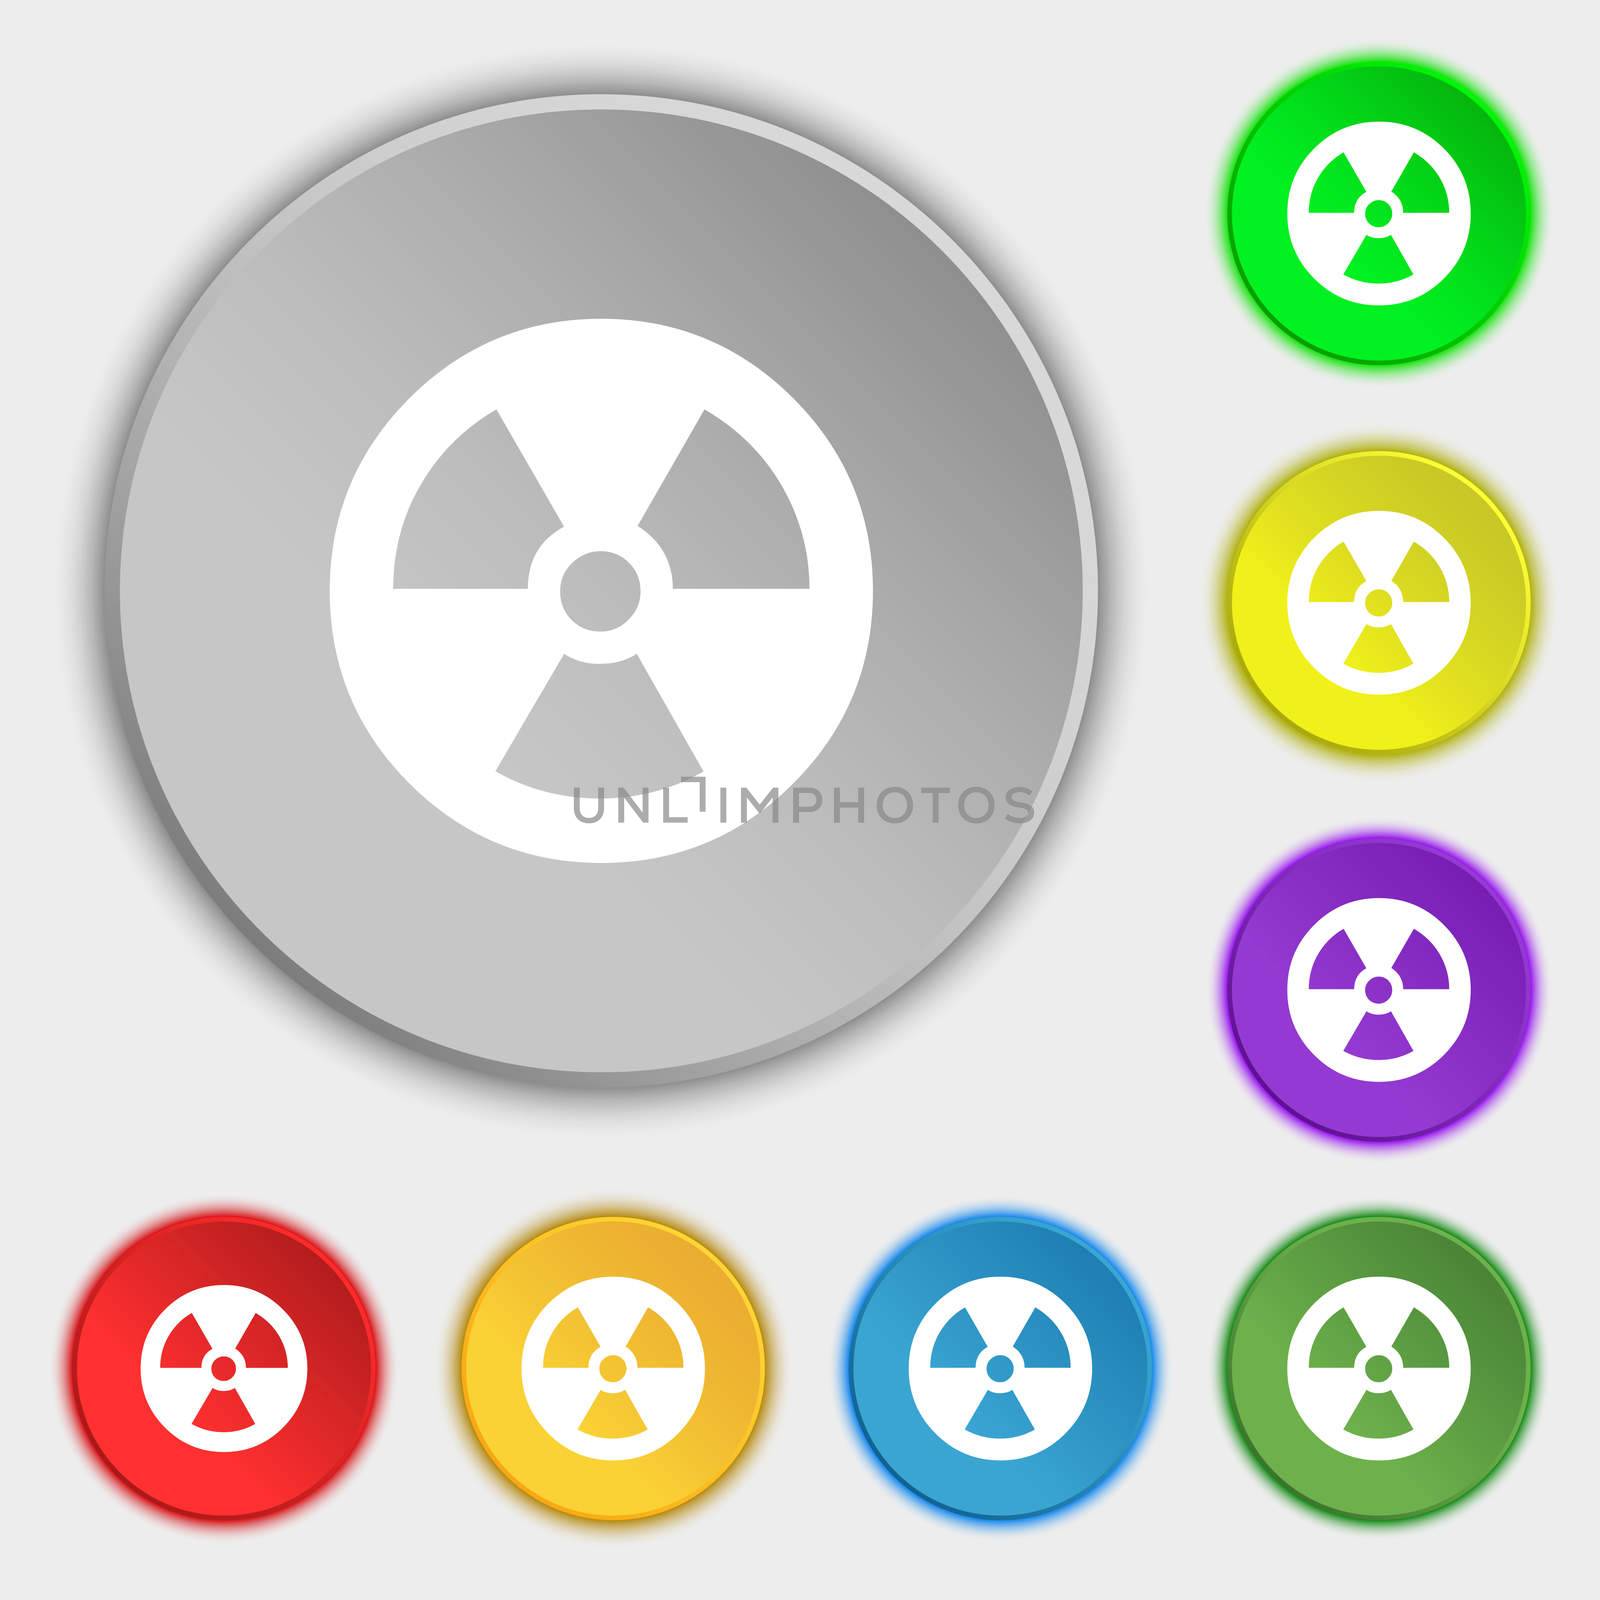 radiation icon sign. Symbol on five flat buttons. illustration